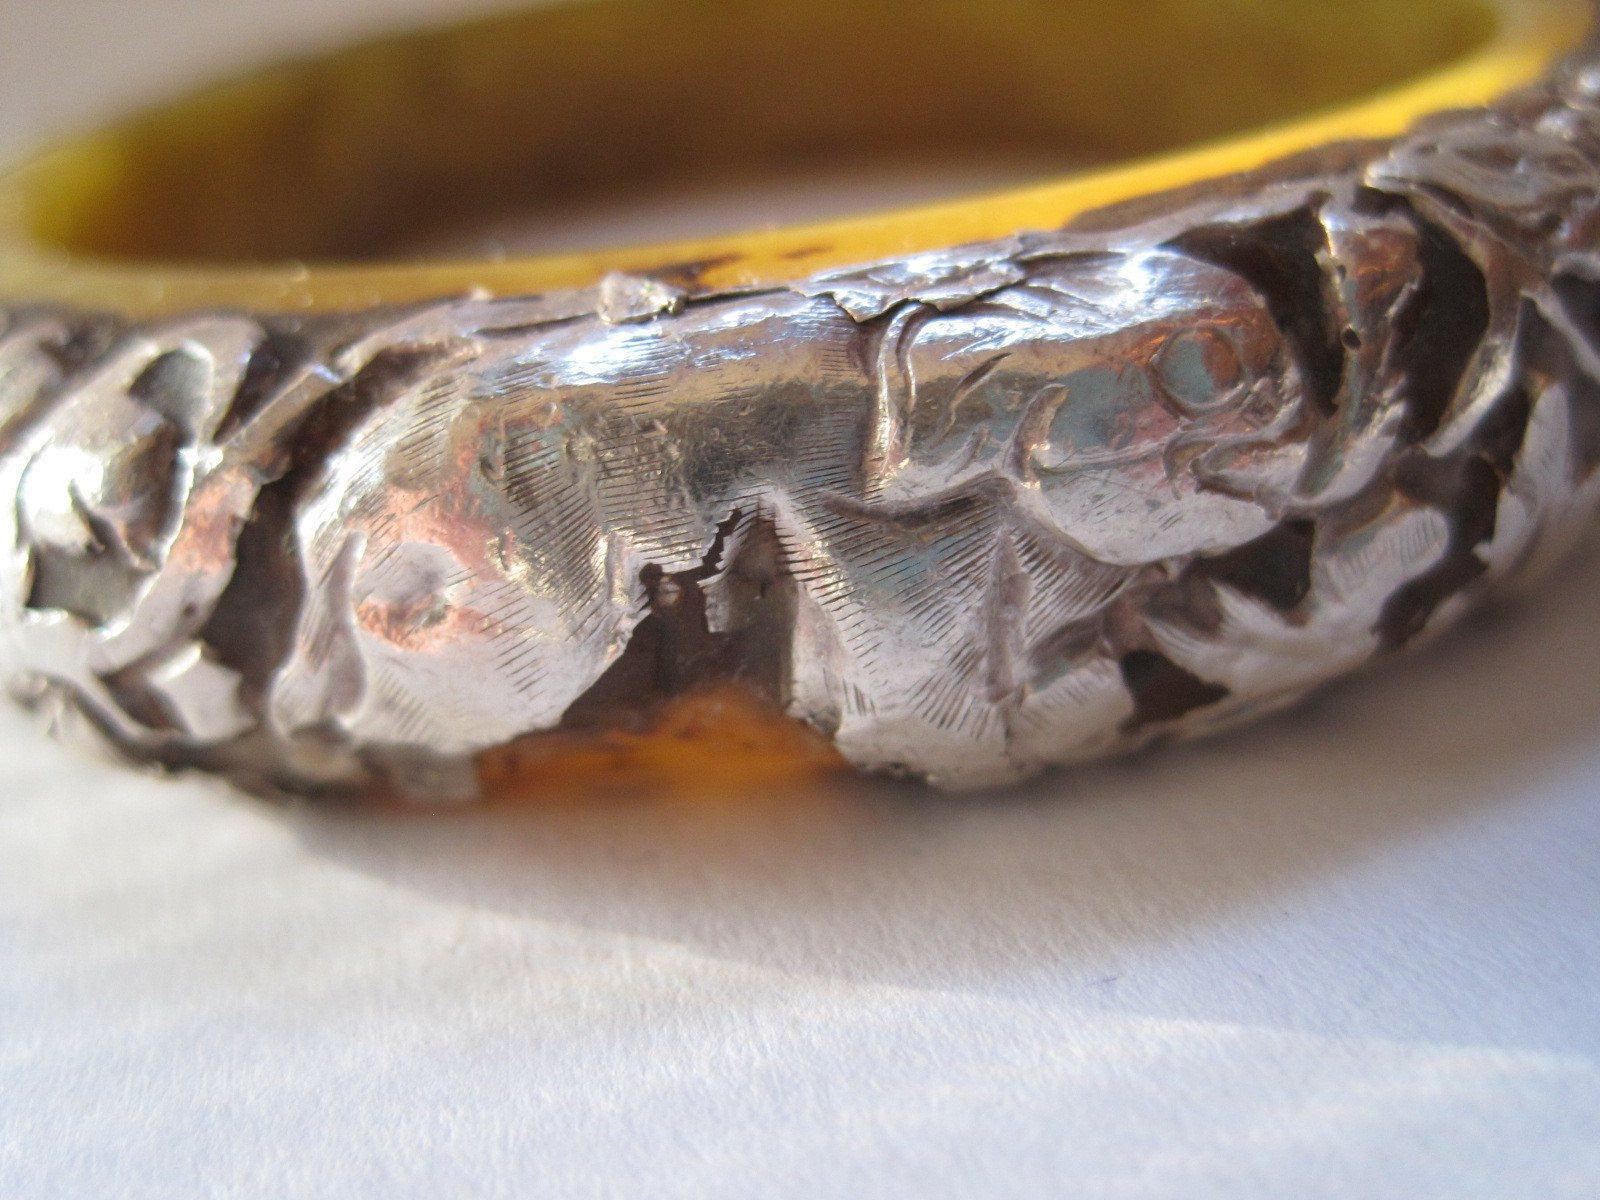 Vintage Copal Resin Bracelet from Nepal or Tibet with Silver Animal Overlay - Anteeka